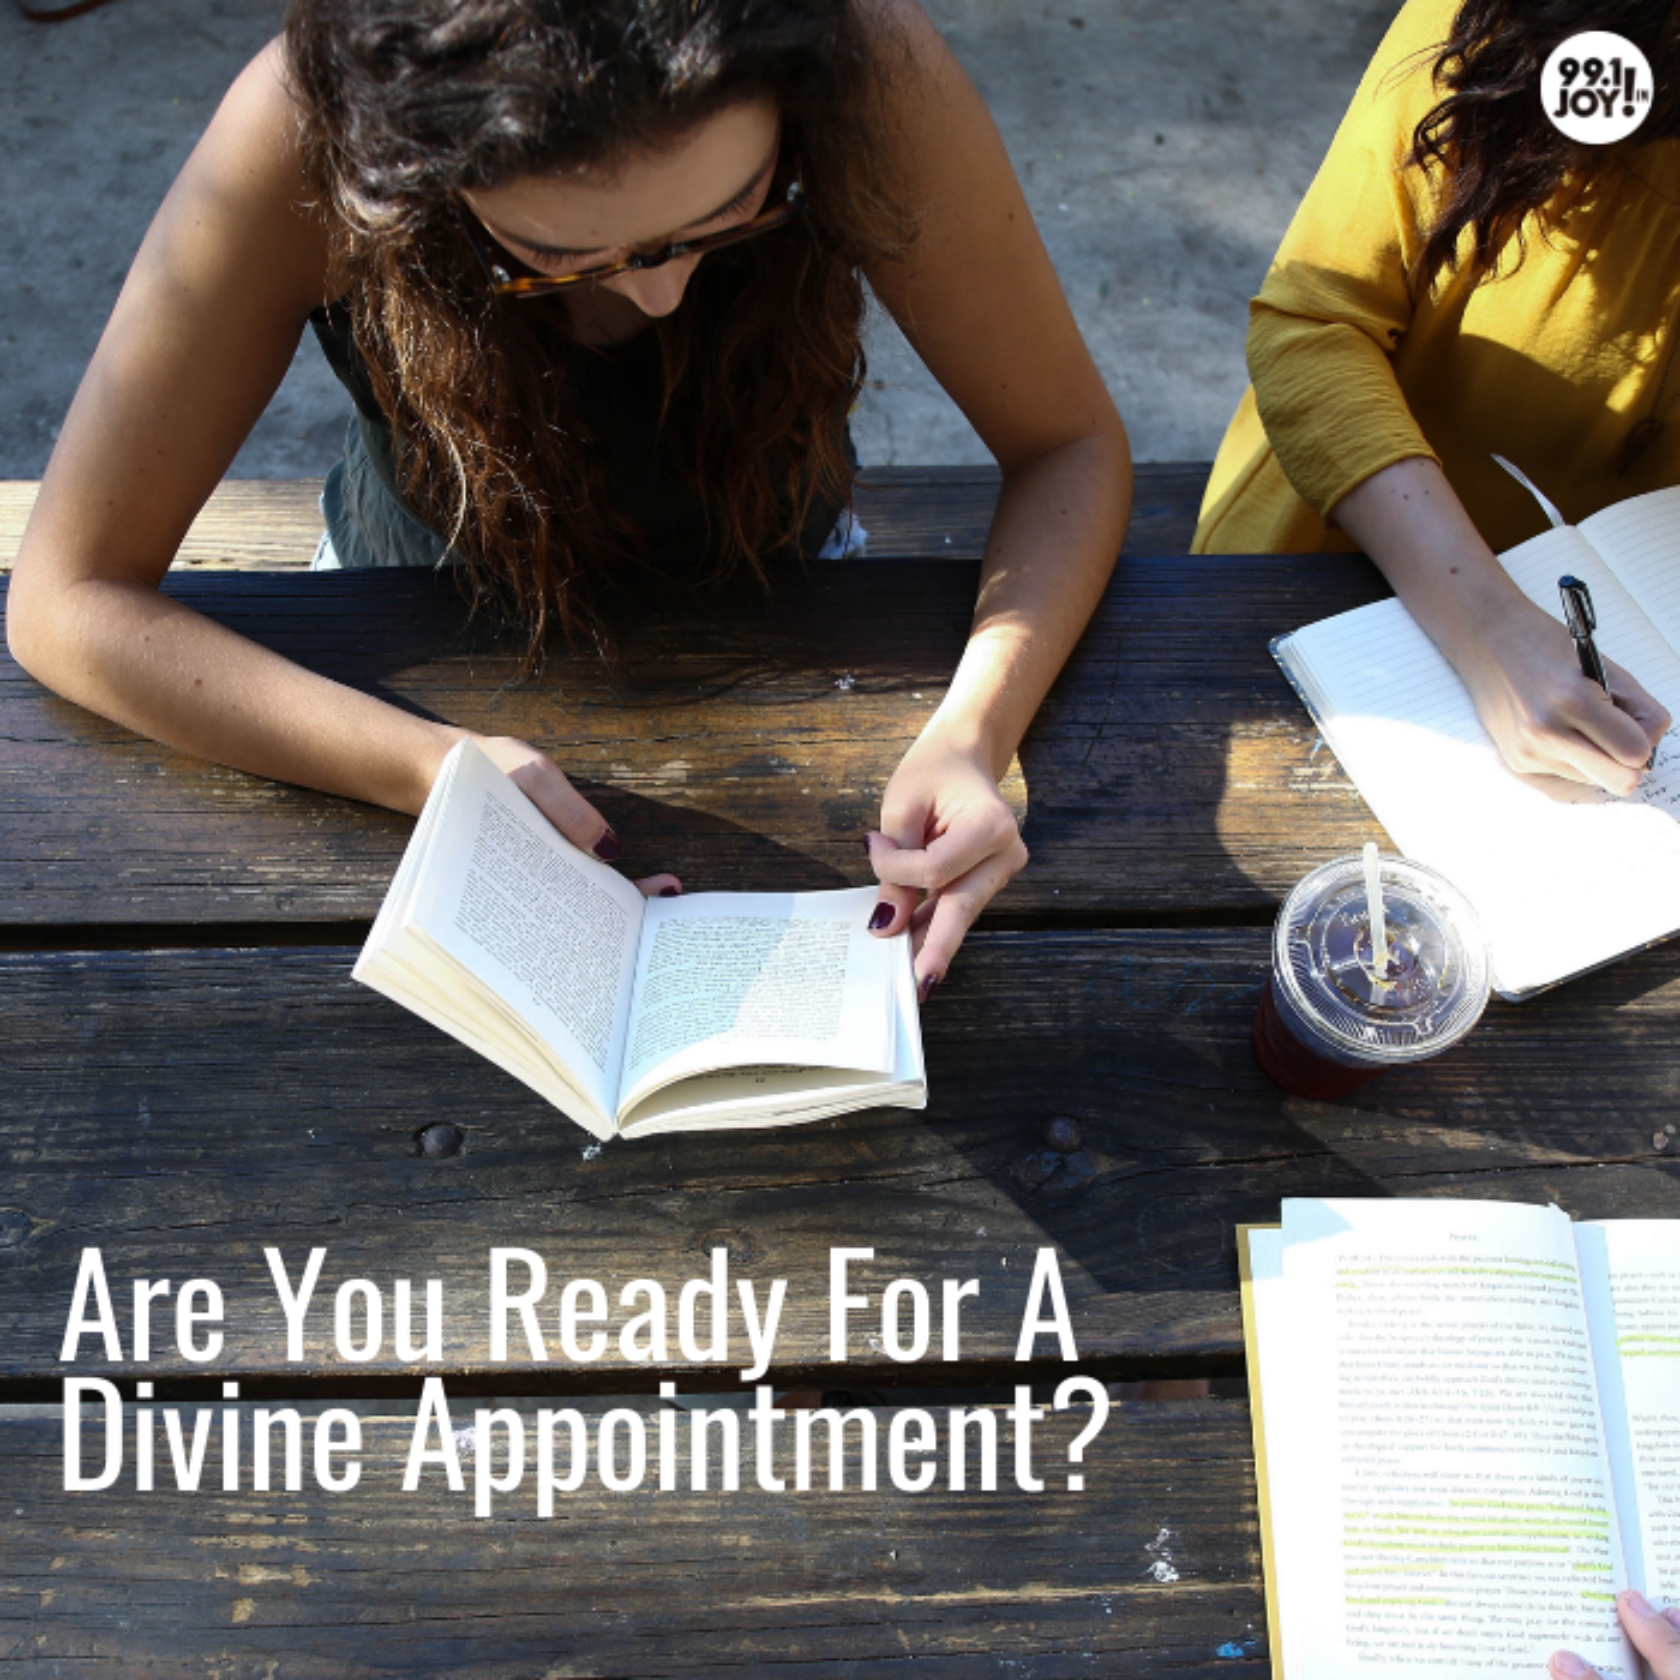 Are You Ready For A Divine Appointment?